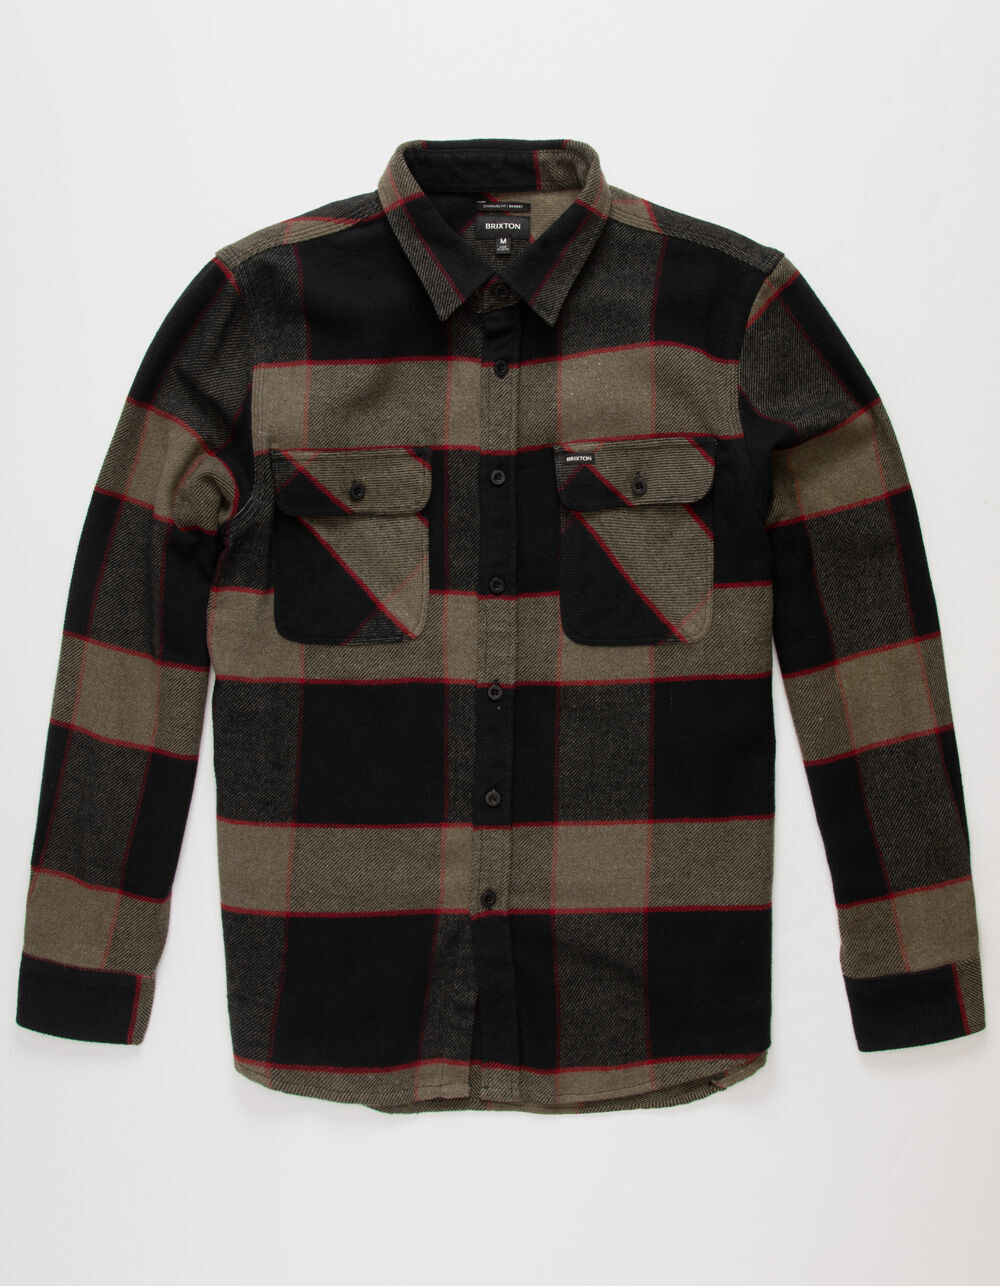 Brixton Bowery Flannel Shirt, $64, Nordstrom